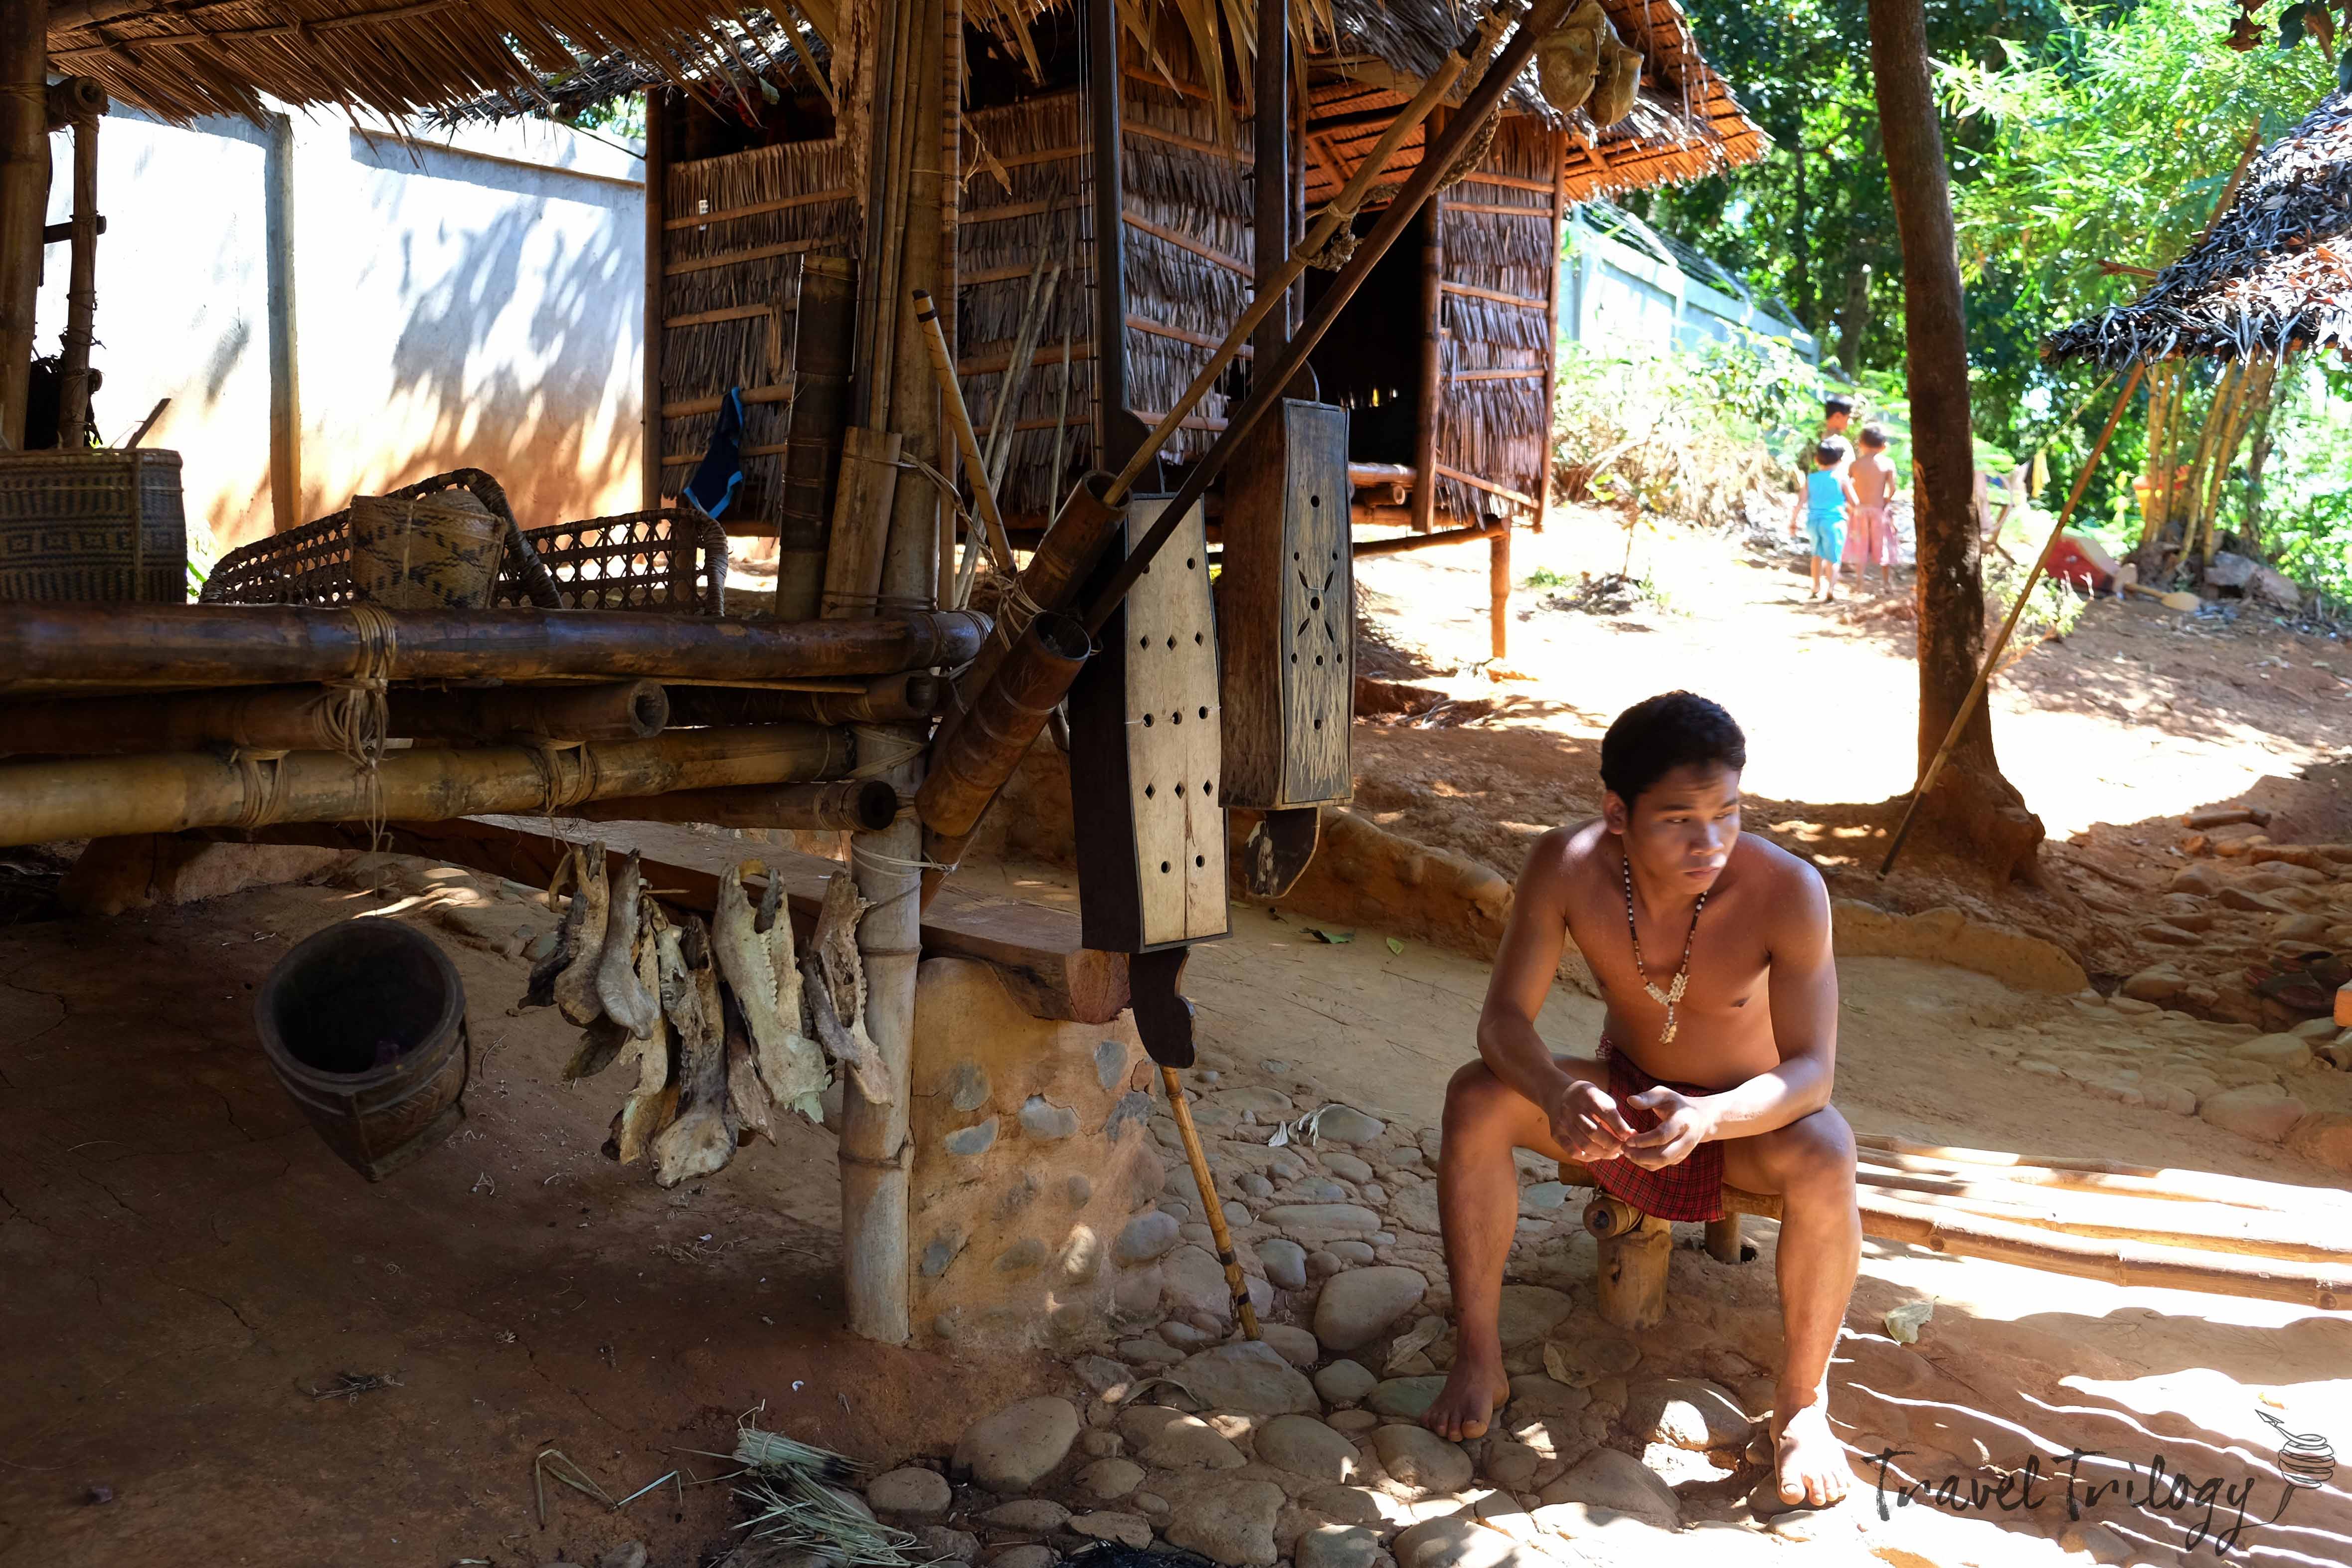 Indigenous Palawan people and their ways of living can also be experienced in the EcoVillage.